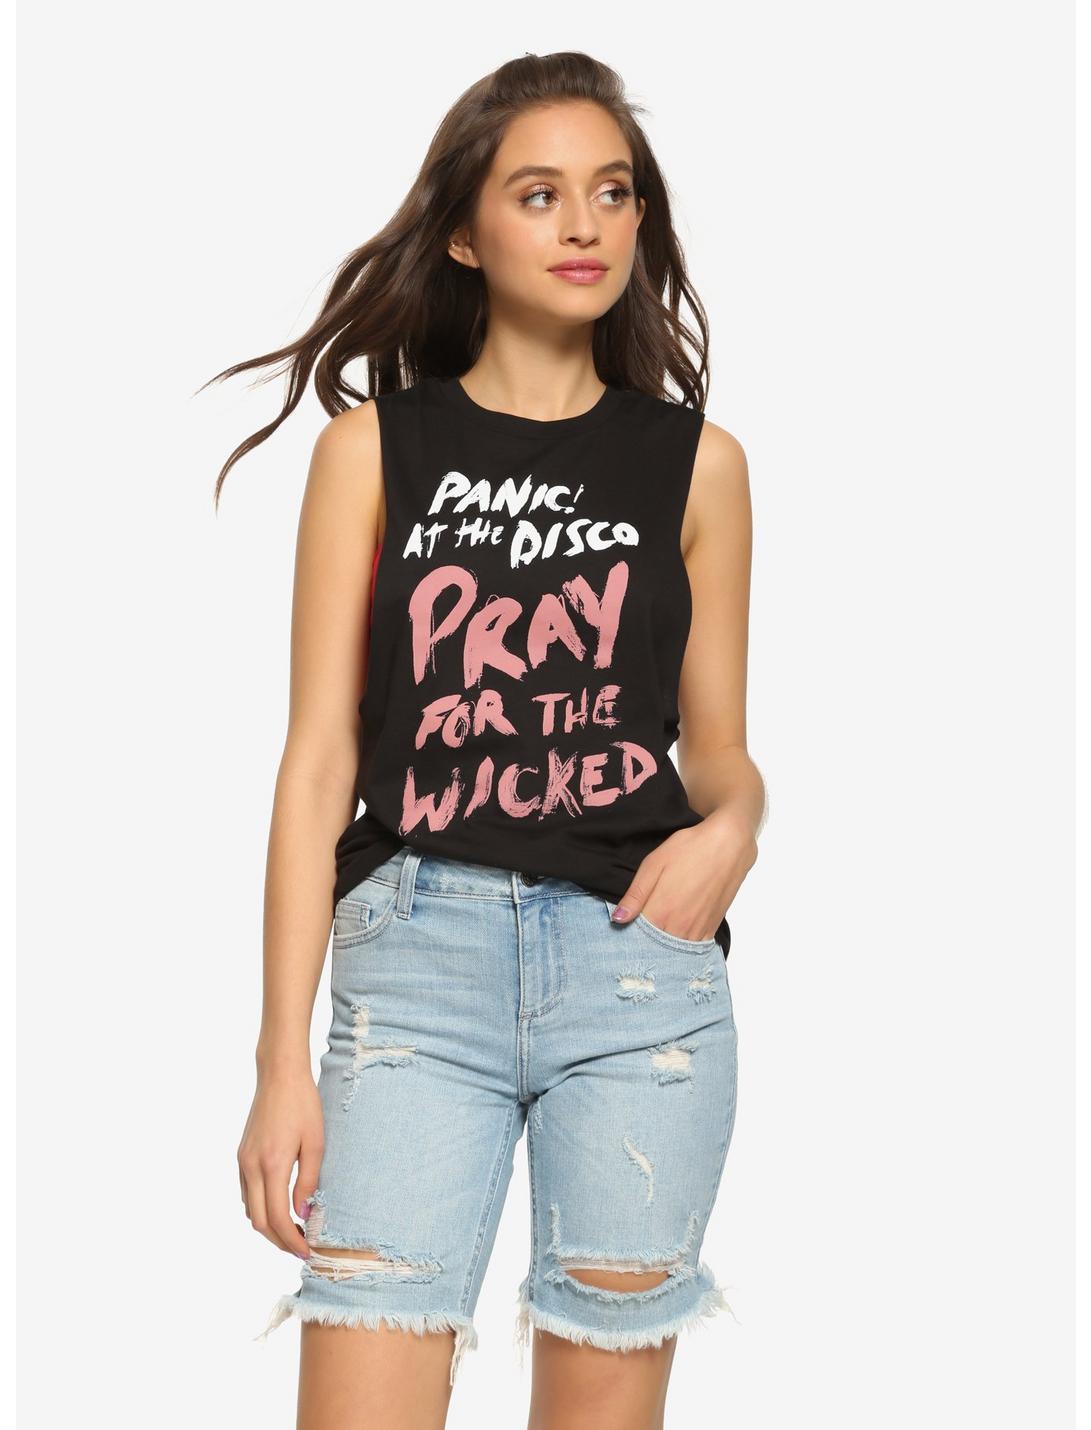 Panic! At The Disco Pray For The Wicked Girls Muscle Top, RED, hi-res